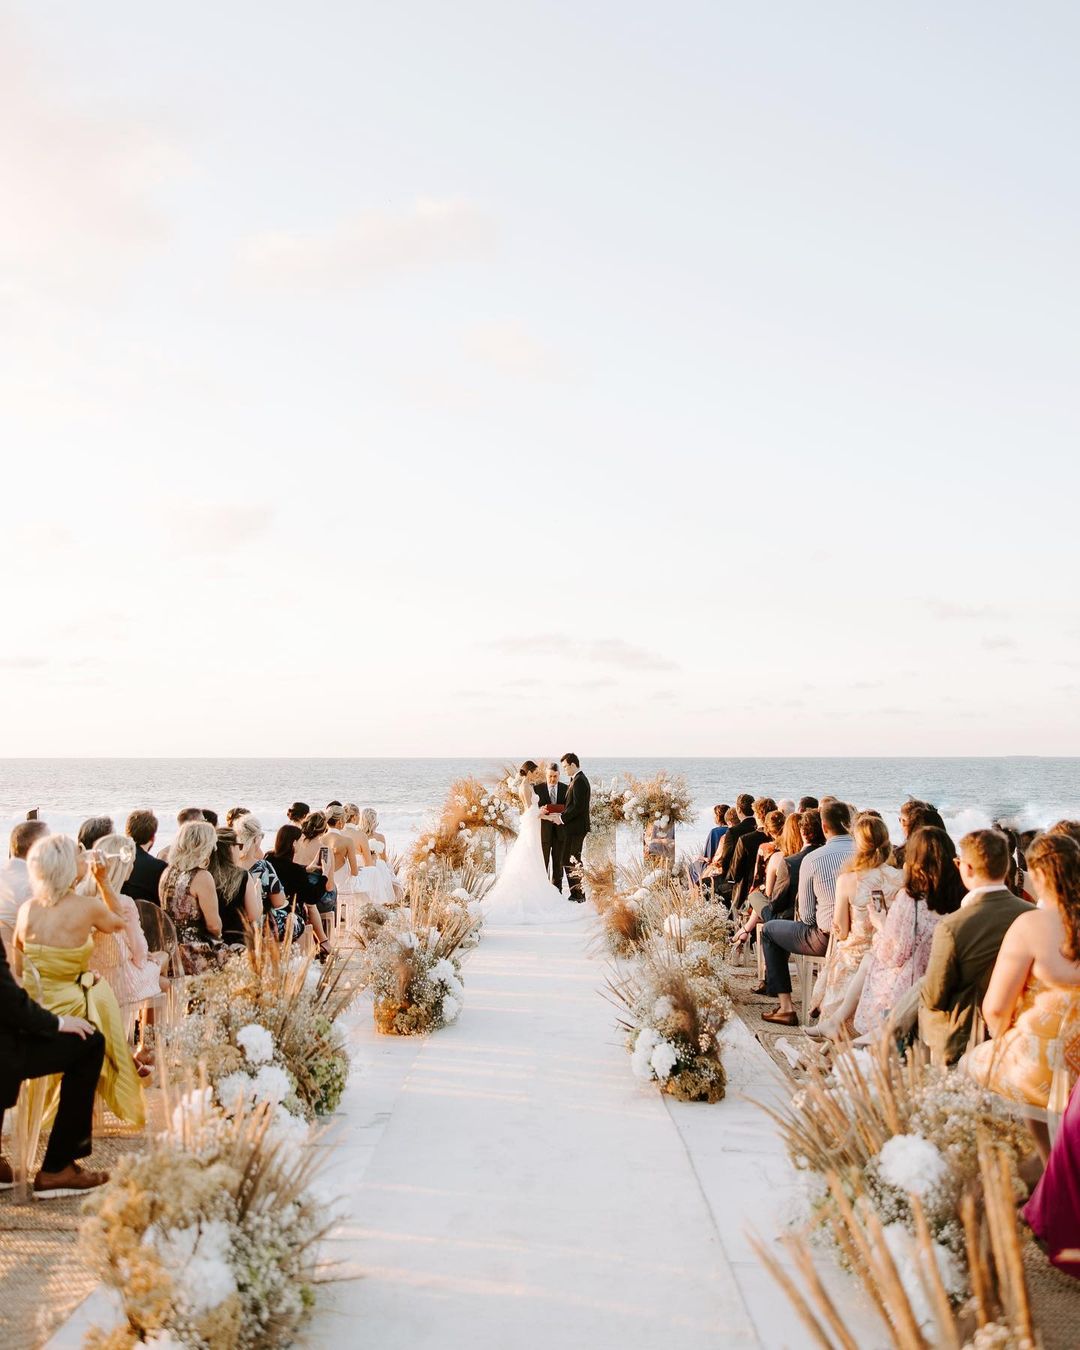 People joyfully witness a ring ceremony seated on either side of a flower-decorated aisle.